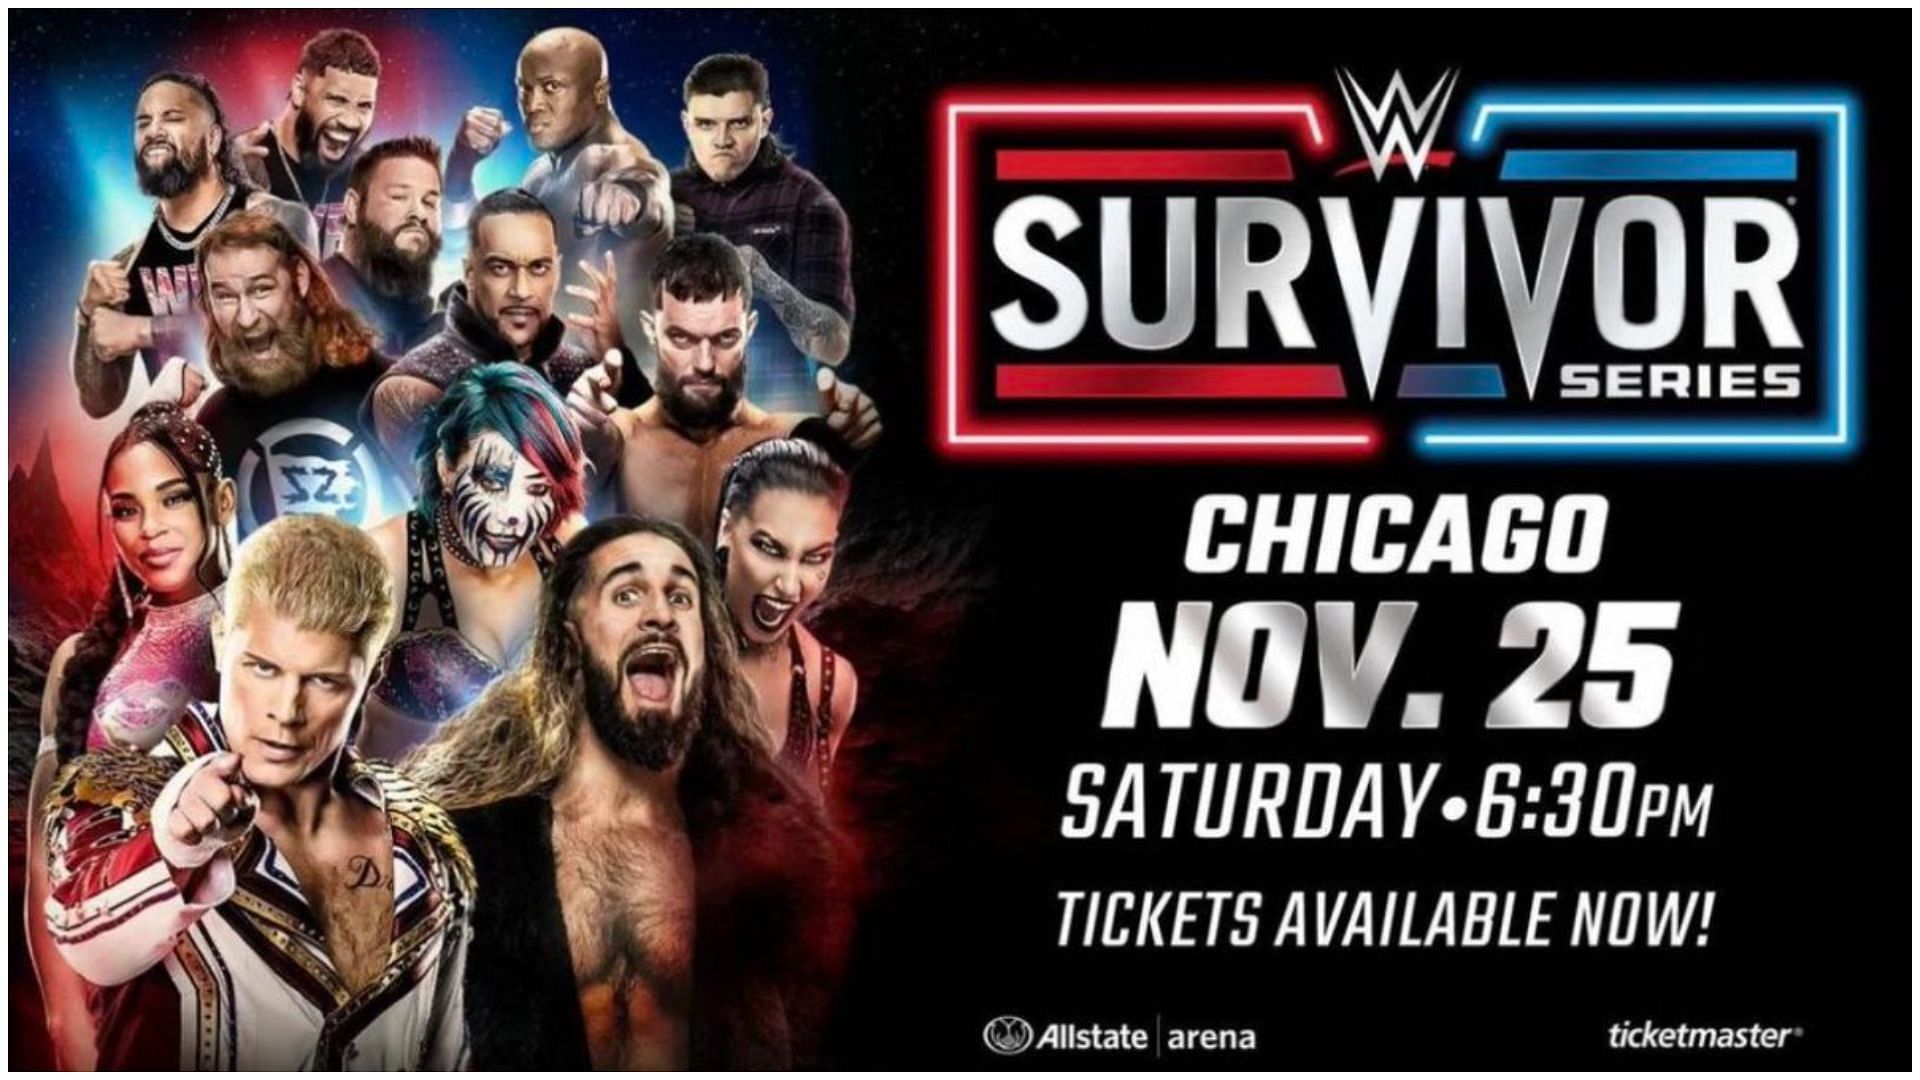 A WWE legend is on his way to Survivor Series.